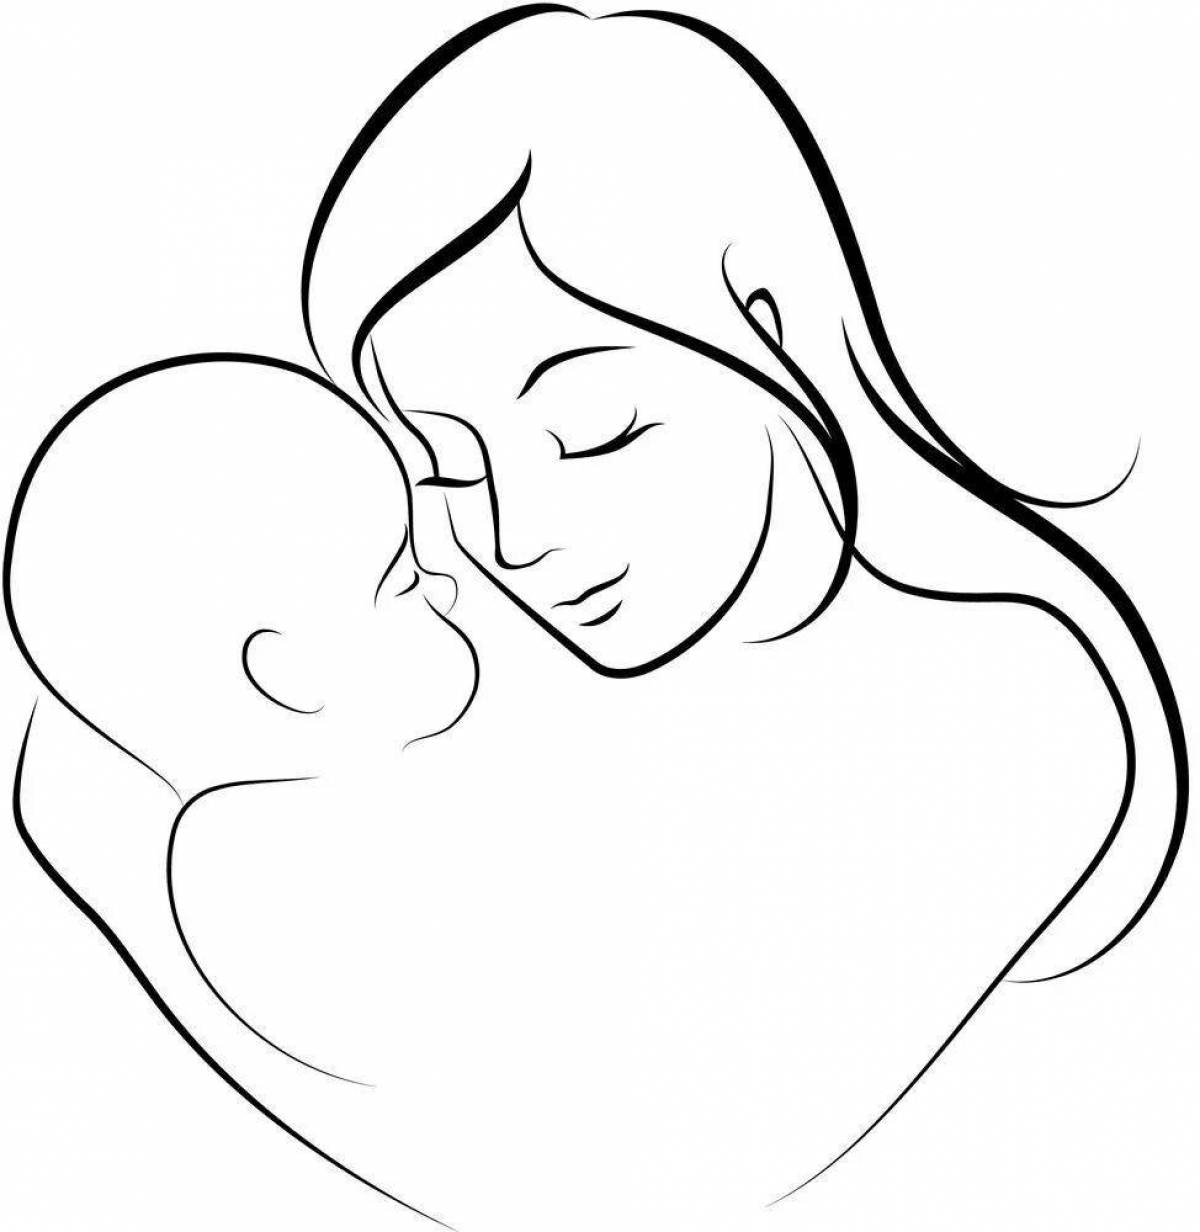 Mom and baby soulful coloring book